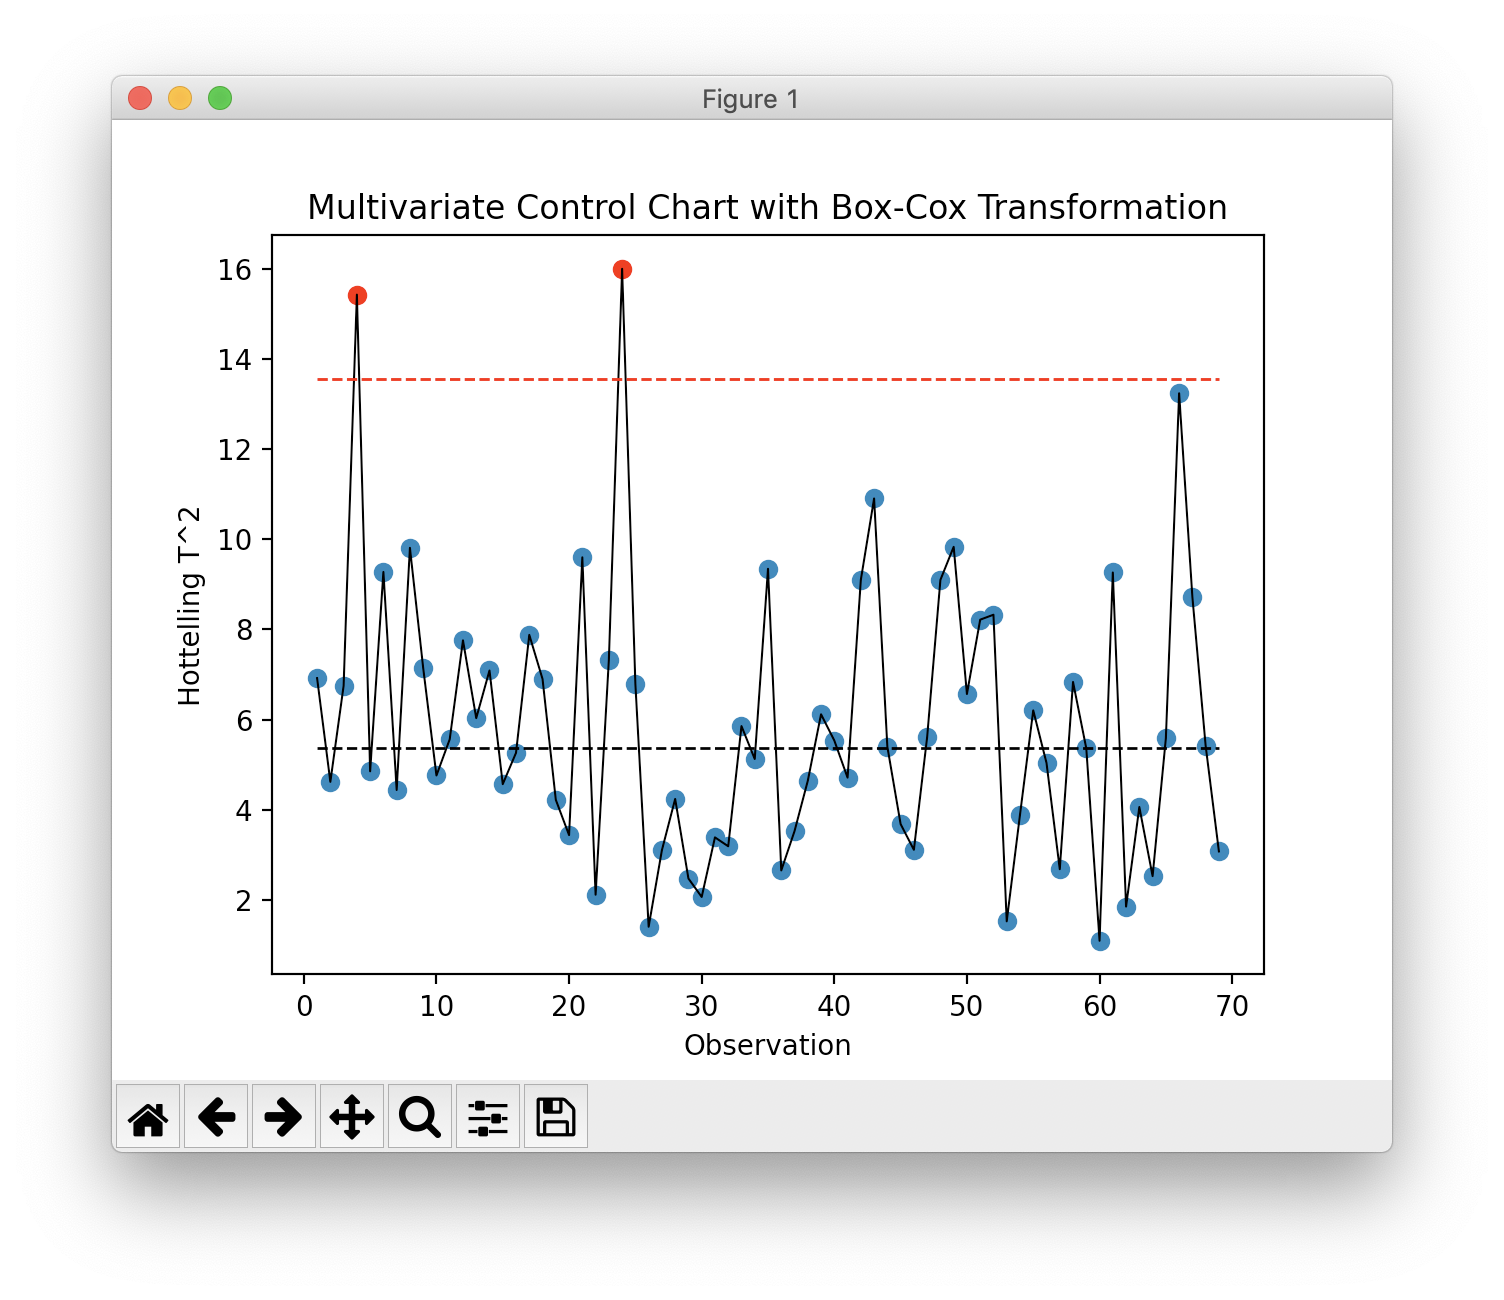 Multivariate Control Chart with Box-Cox Transformation